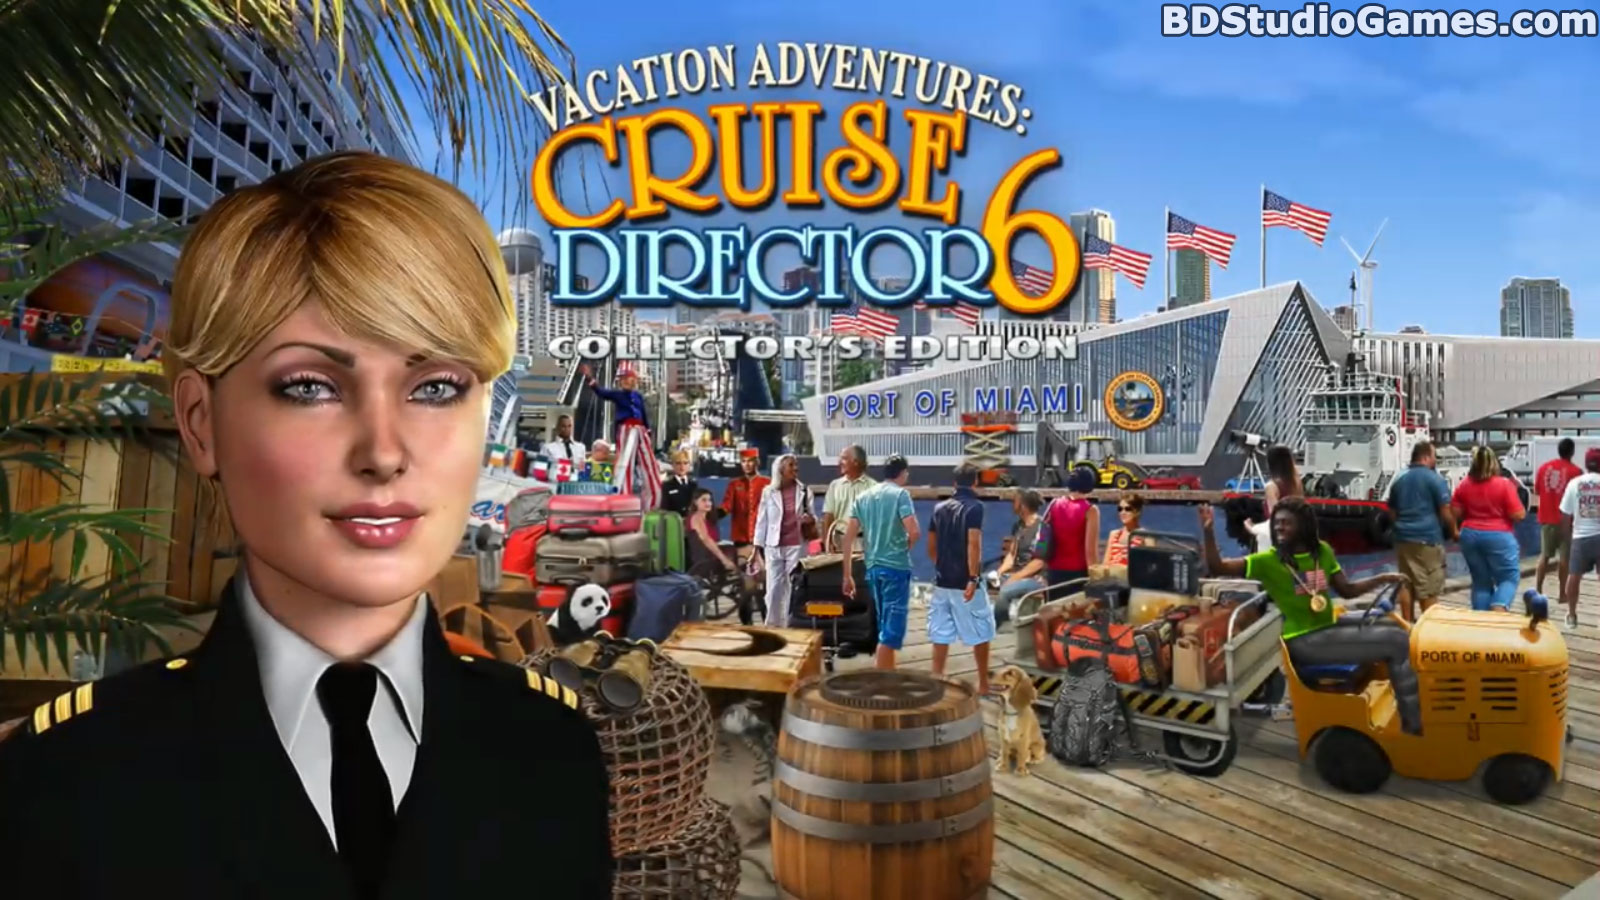 Vacation Adventures: Cruise Director 6 Collector's Edition Free Download Screenshots 15